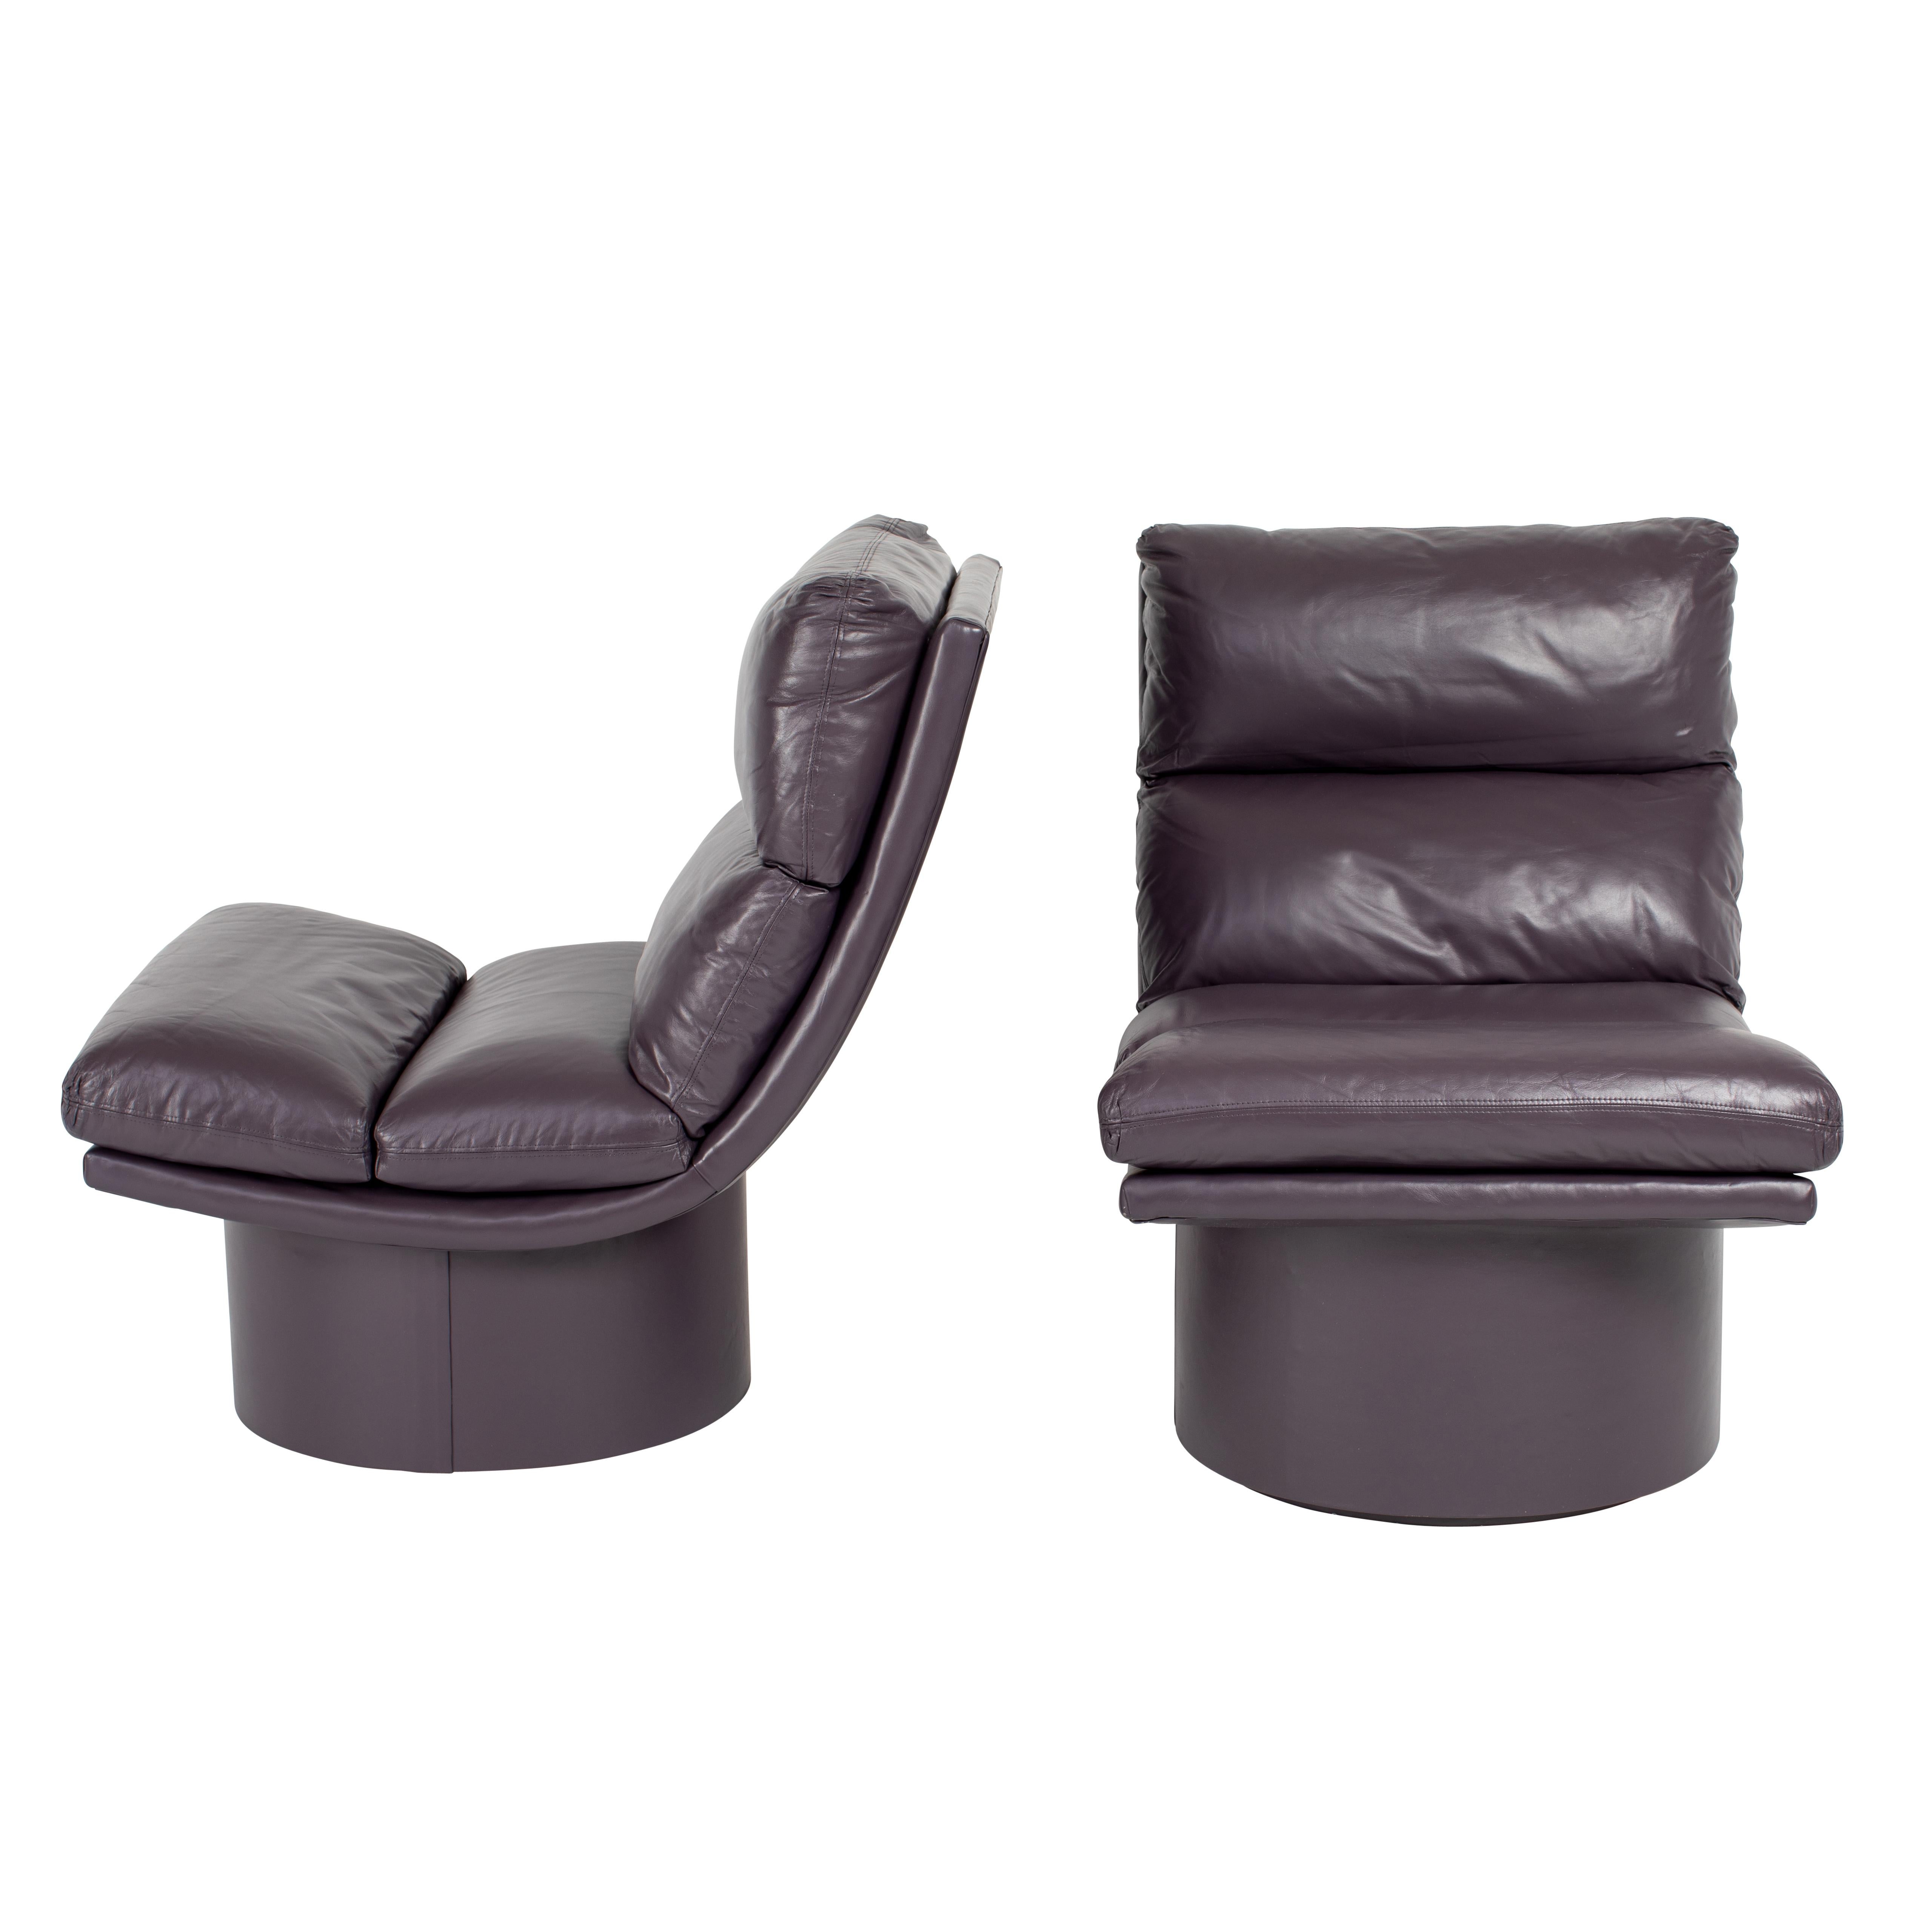 Eggplant Leather Scoop Chairs on Swivel Bases, circa 1980s